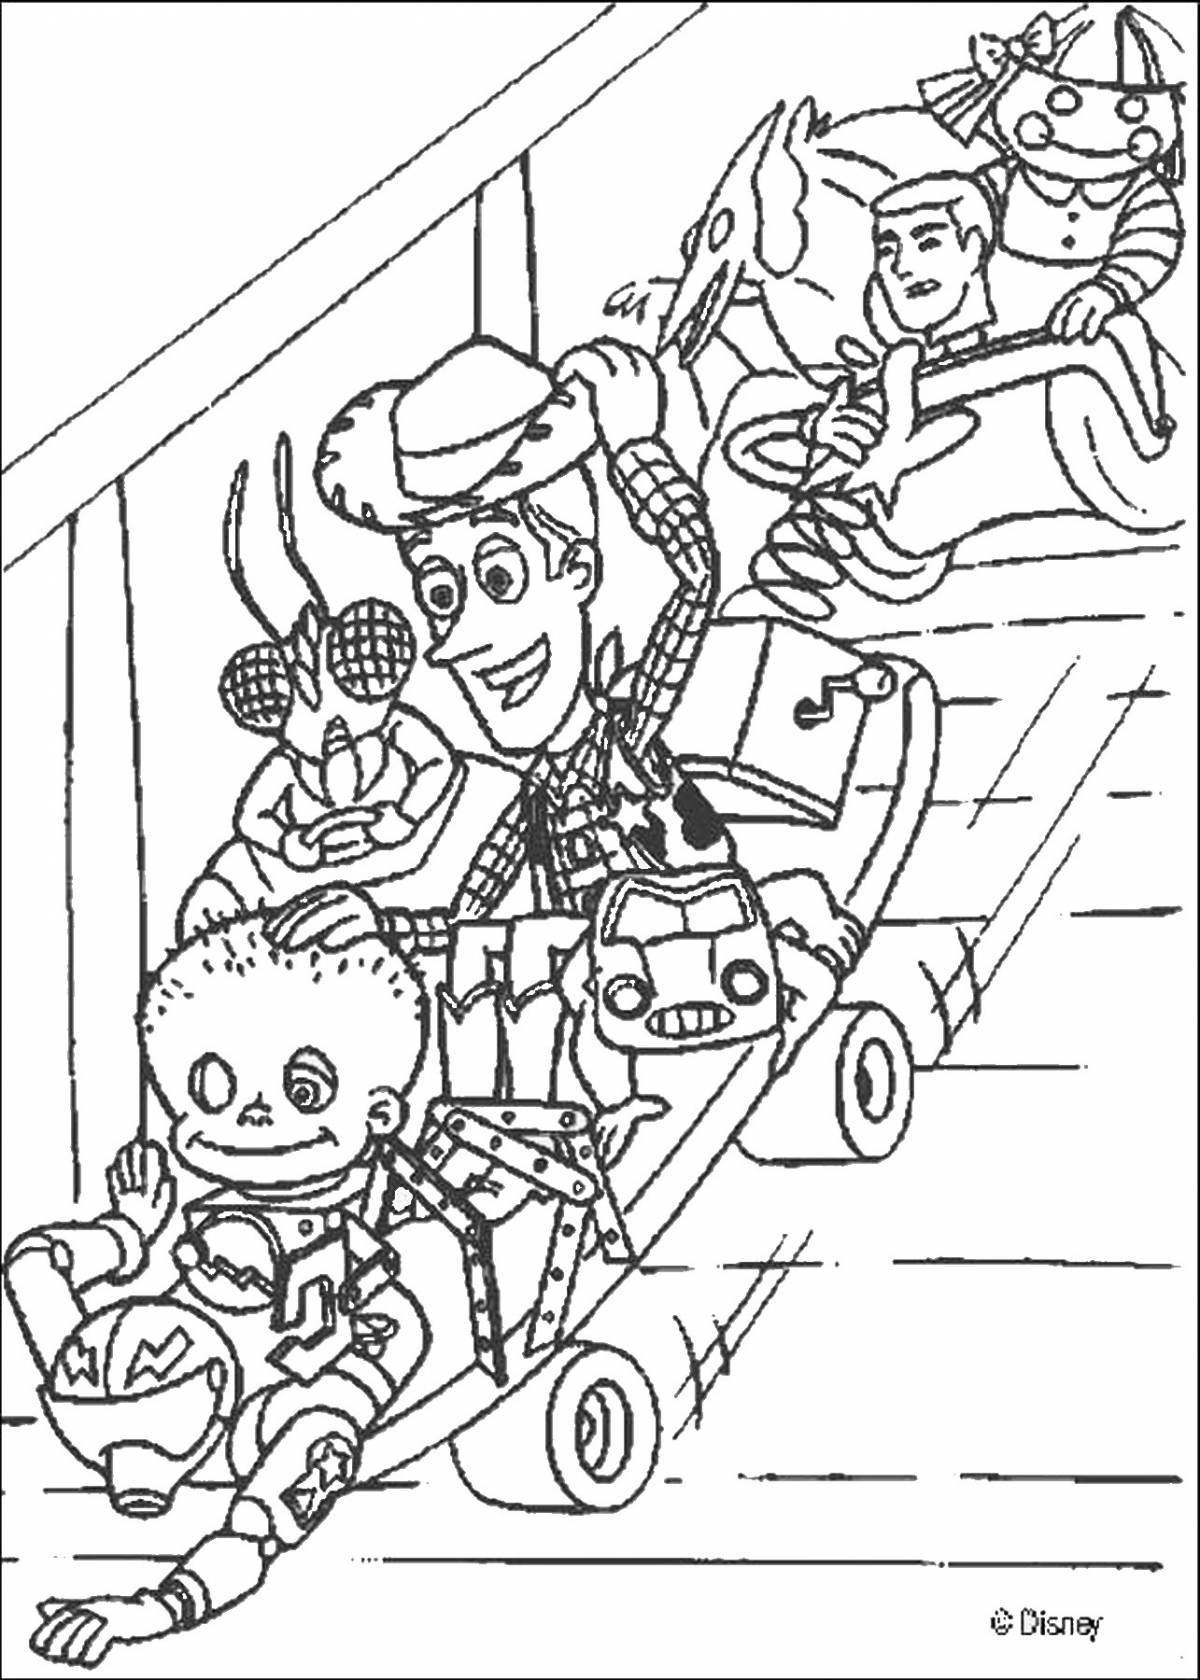 Tillie Willy's fun coloring book